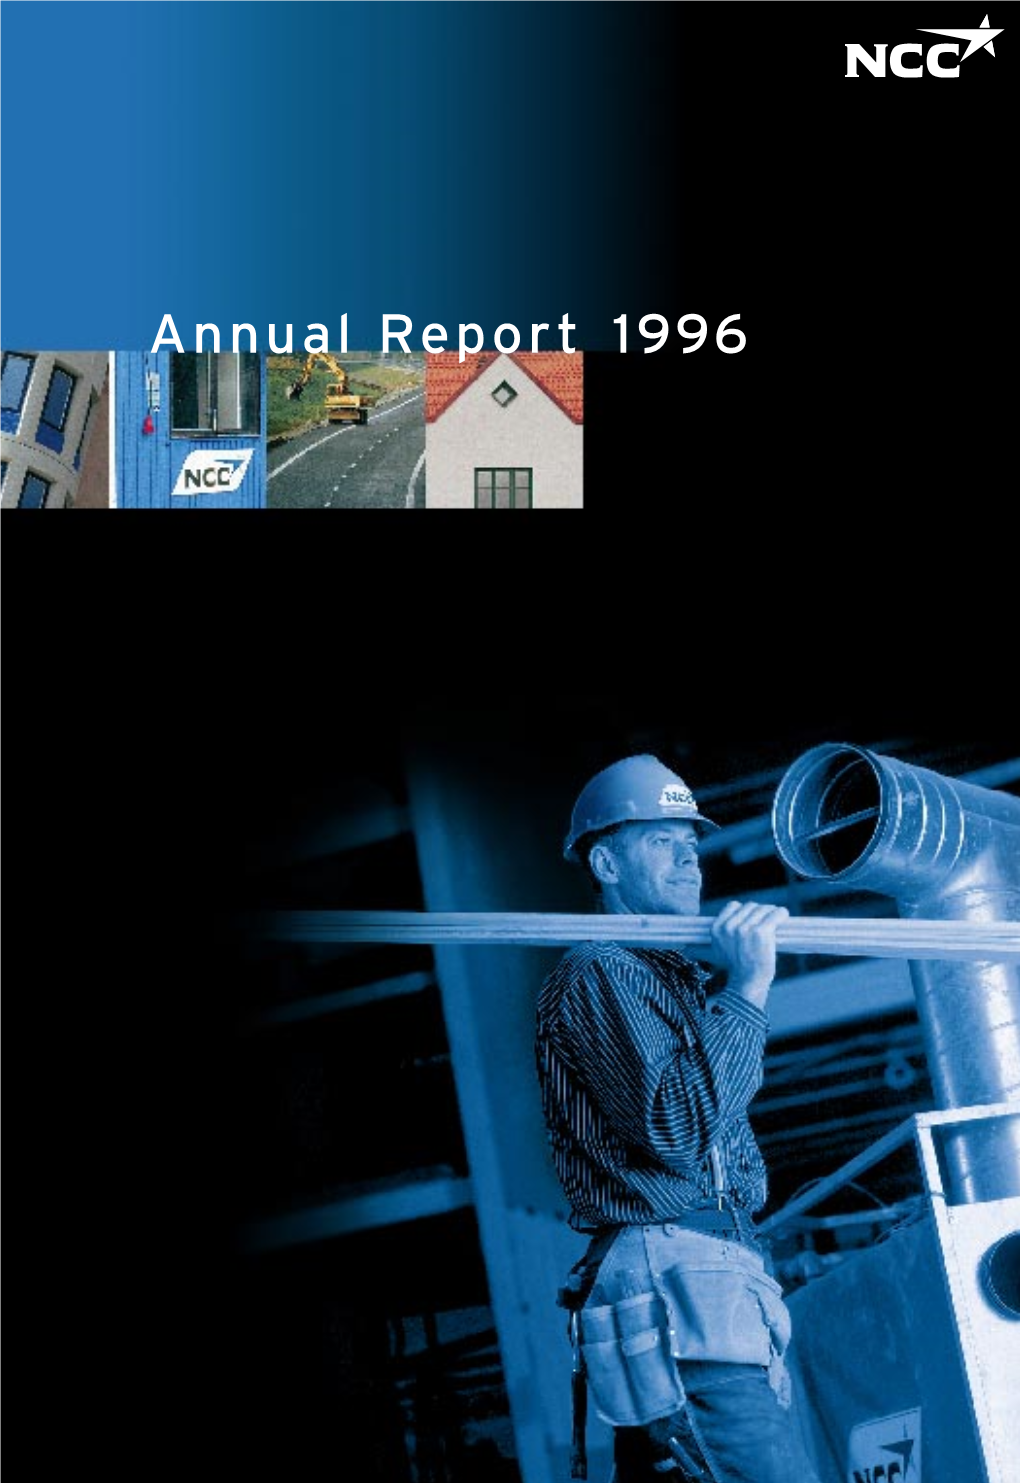 Annual Report 1996 Contents